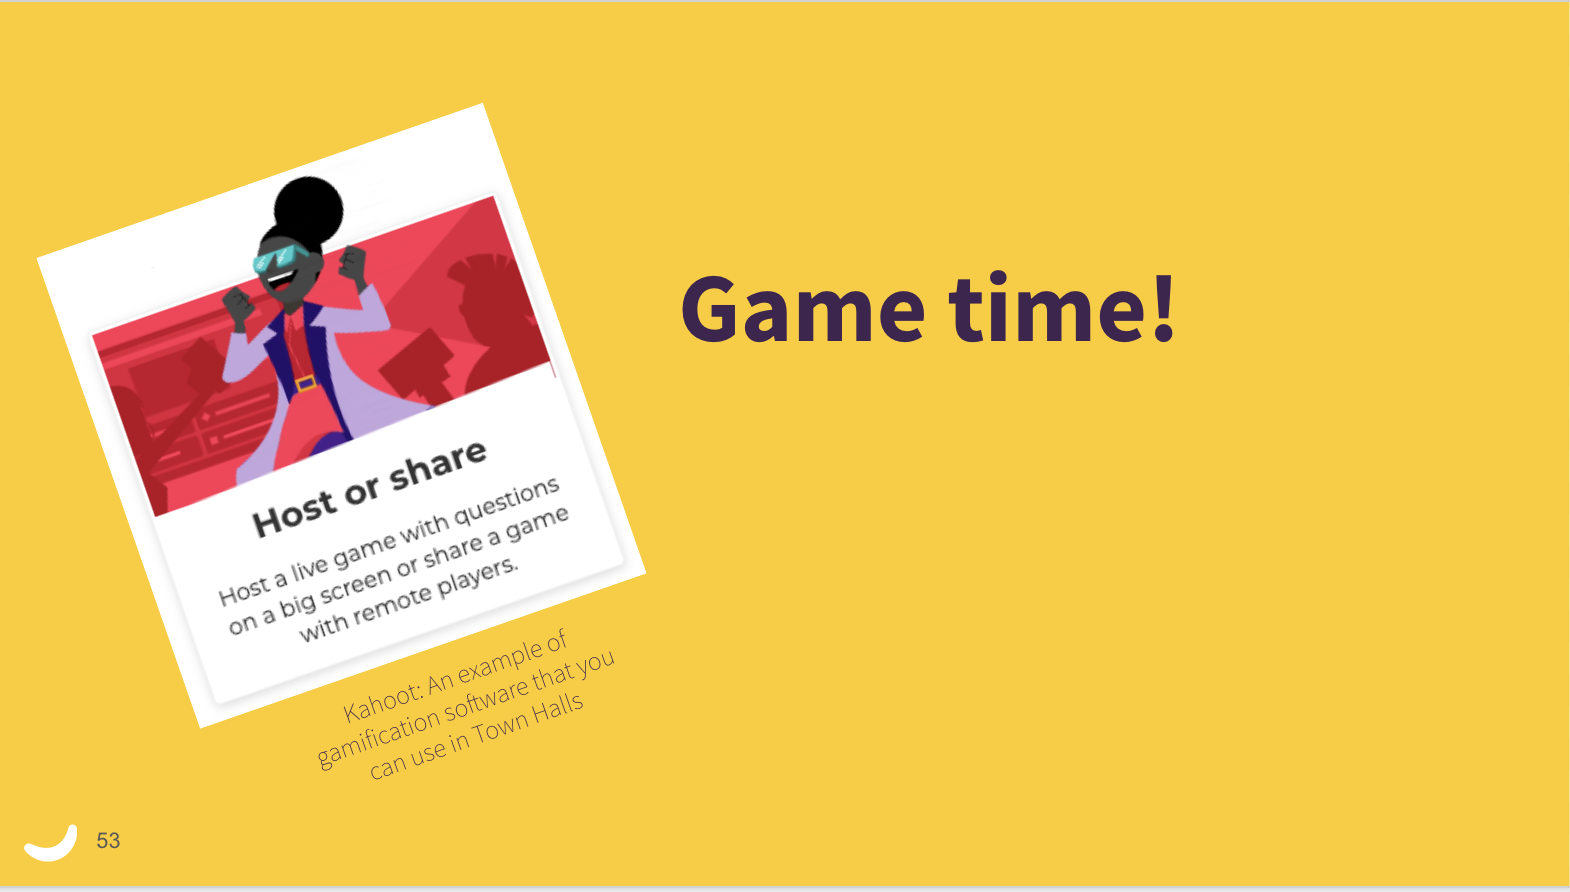 Powerpoint slide that says: 'Game time!' and features a tip to host a live game in your town hall